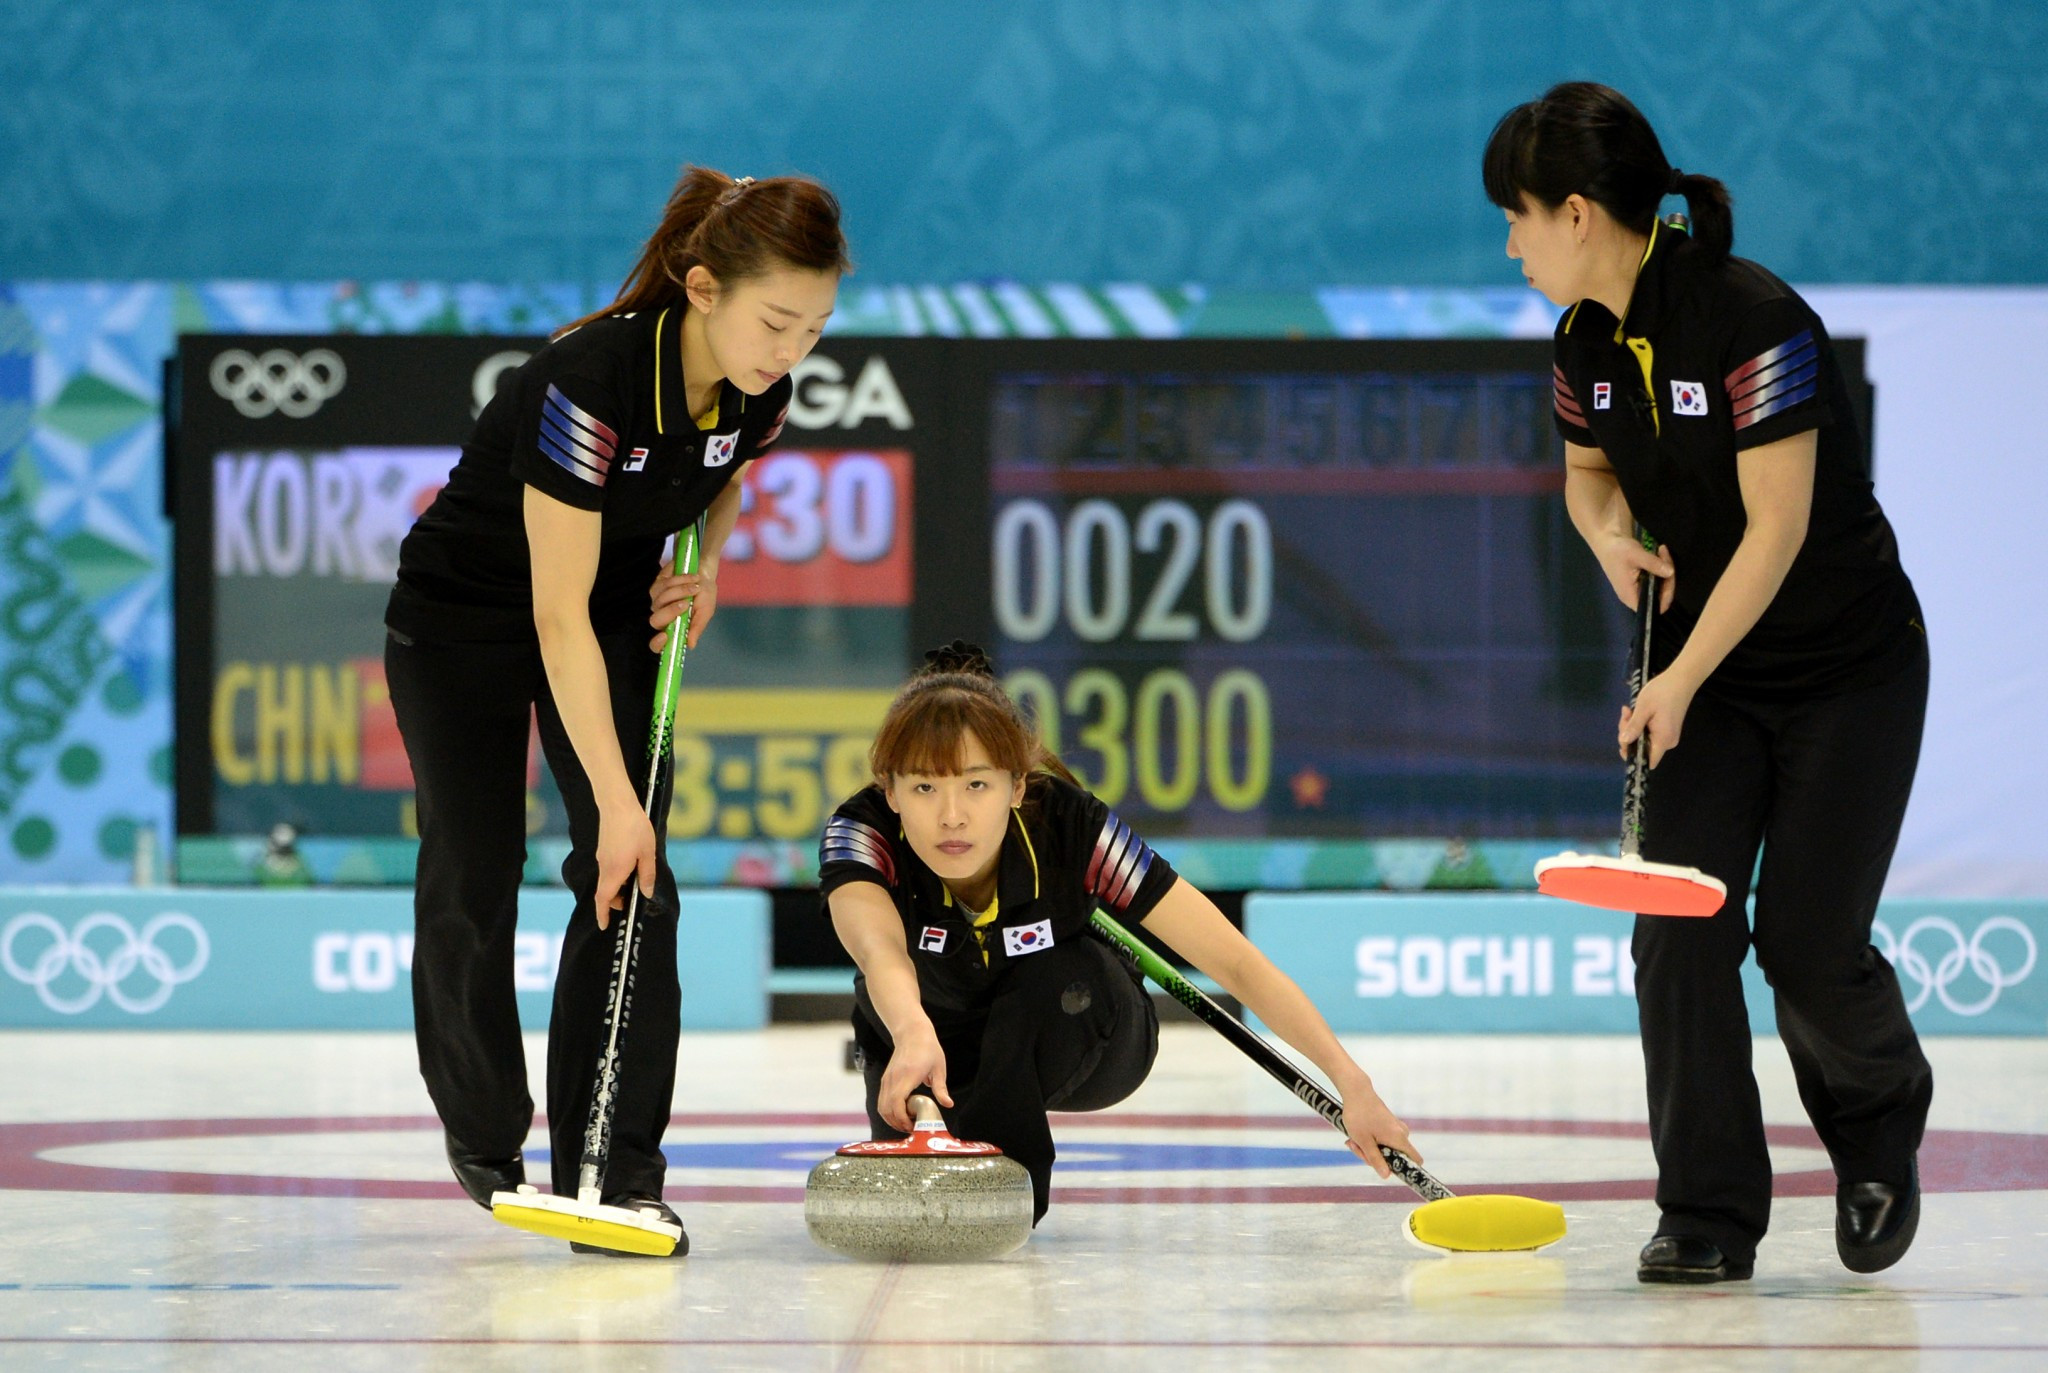 South Korea made their first appearance in curling at the Winter Olympics when the women's team featured at Sochi 2014 ©Getty Images